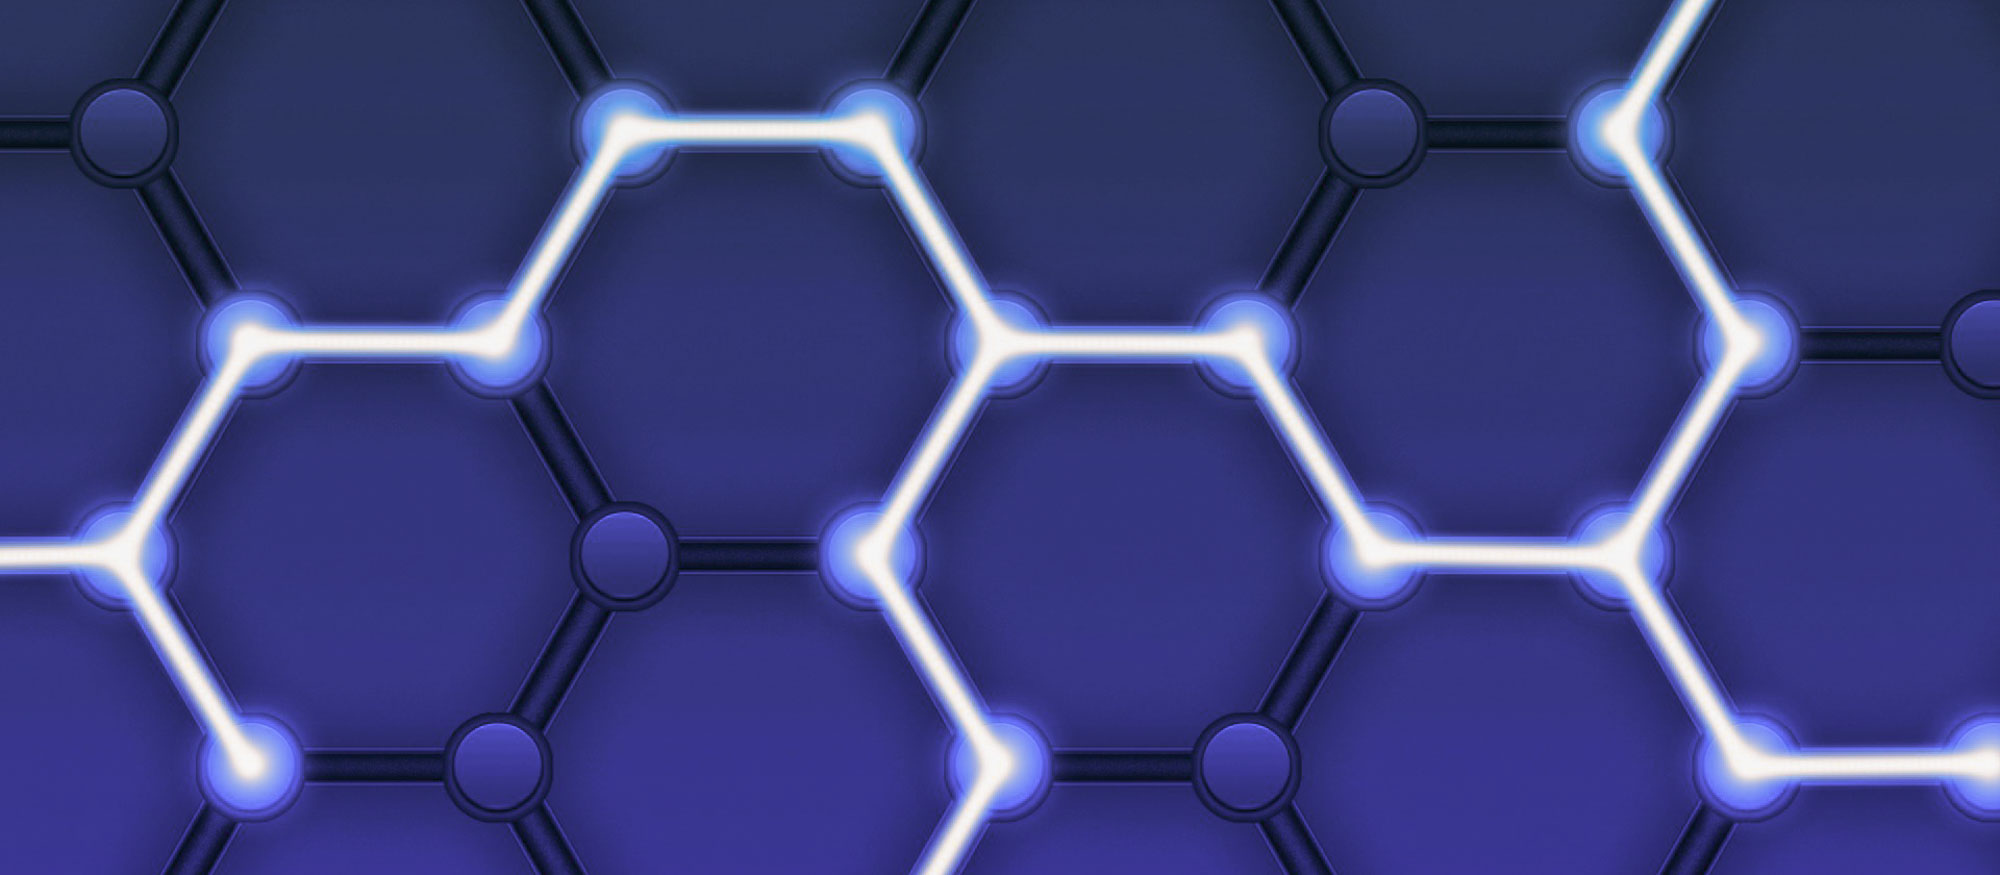 blockchain is represented by a ray of light that moves across multiple nodes in a hexagonal pattern